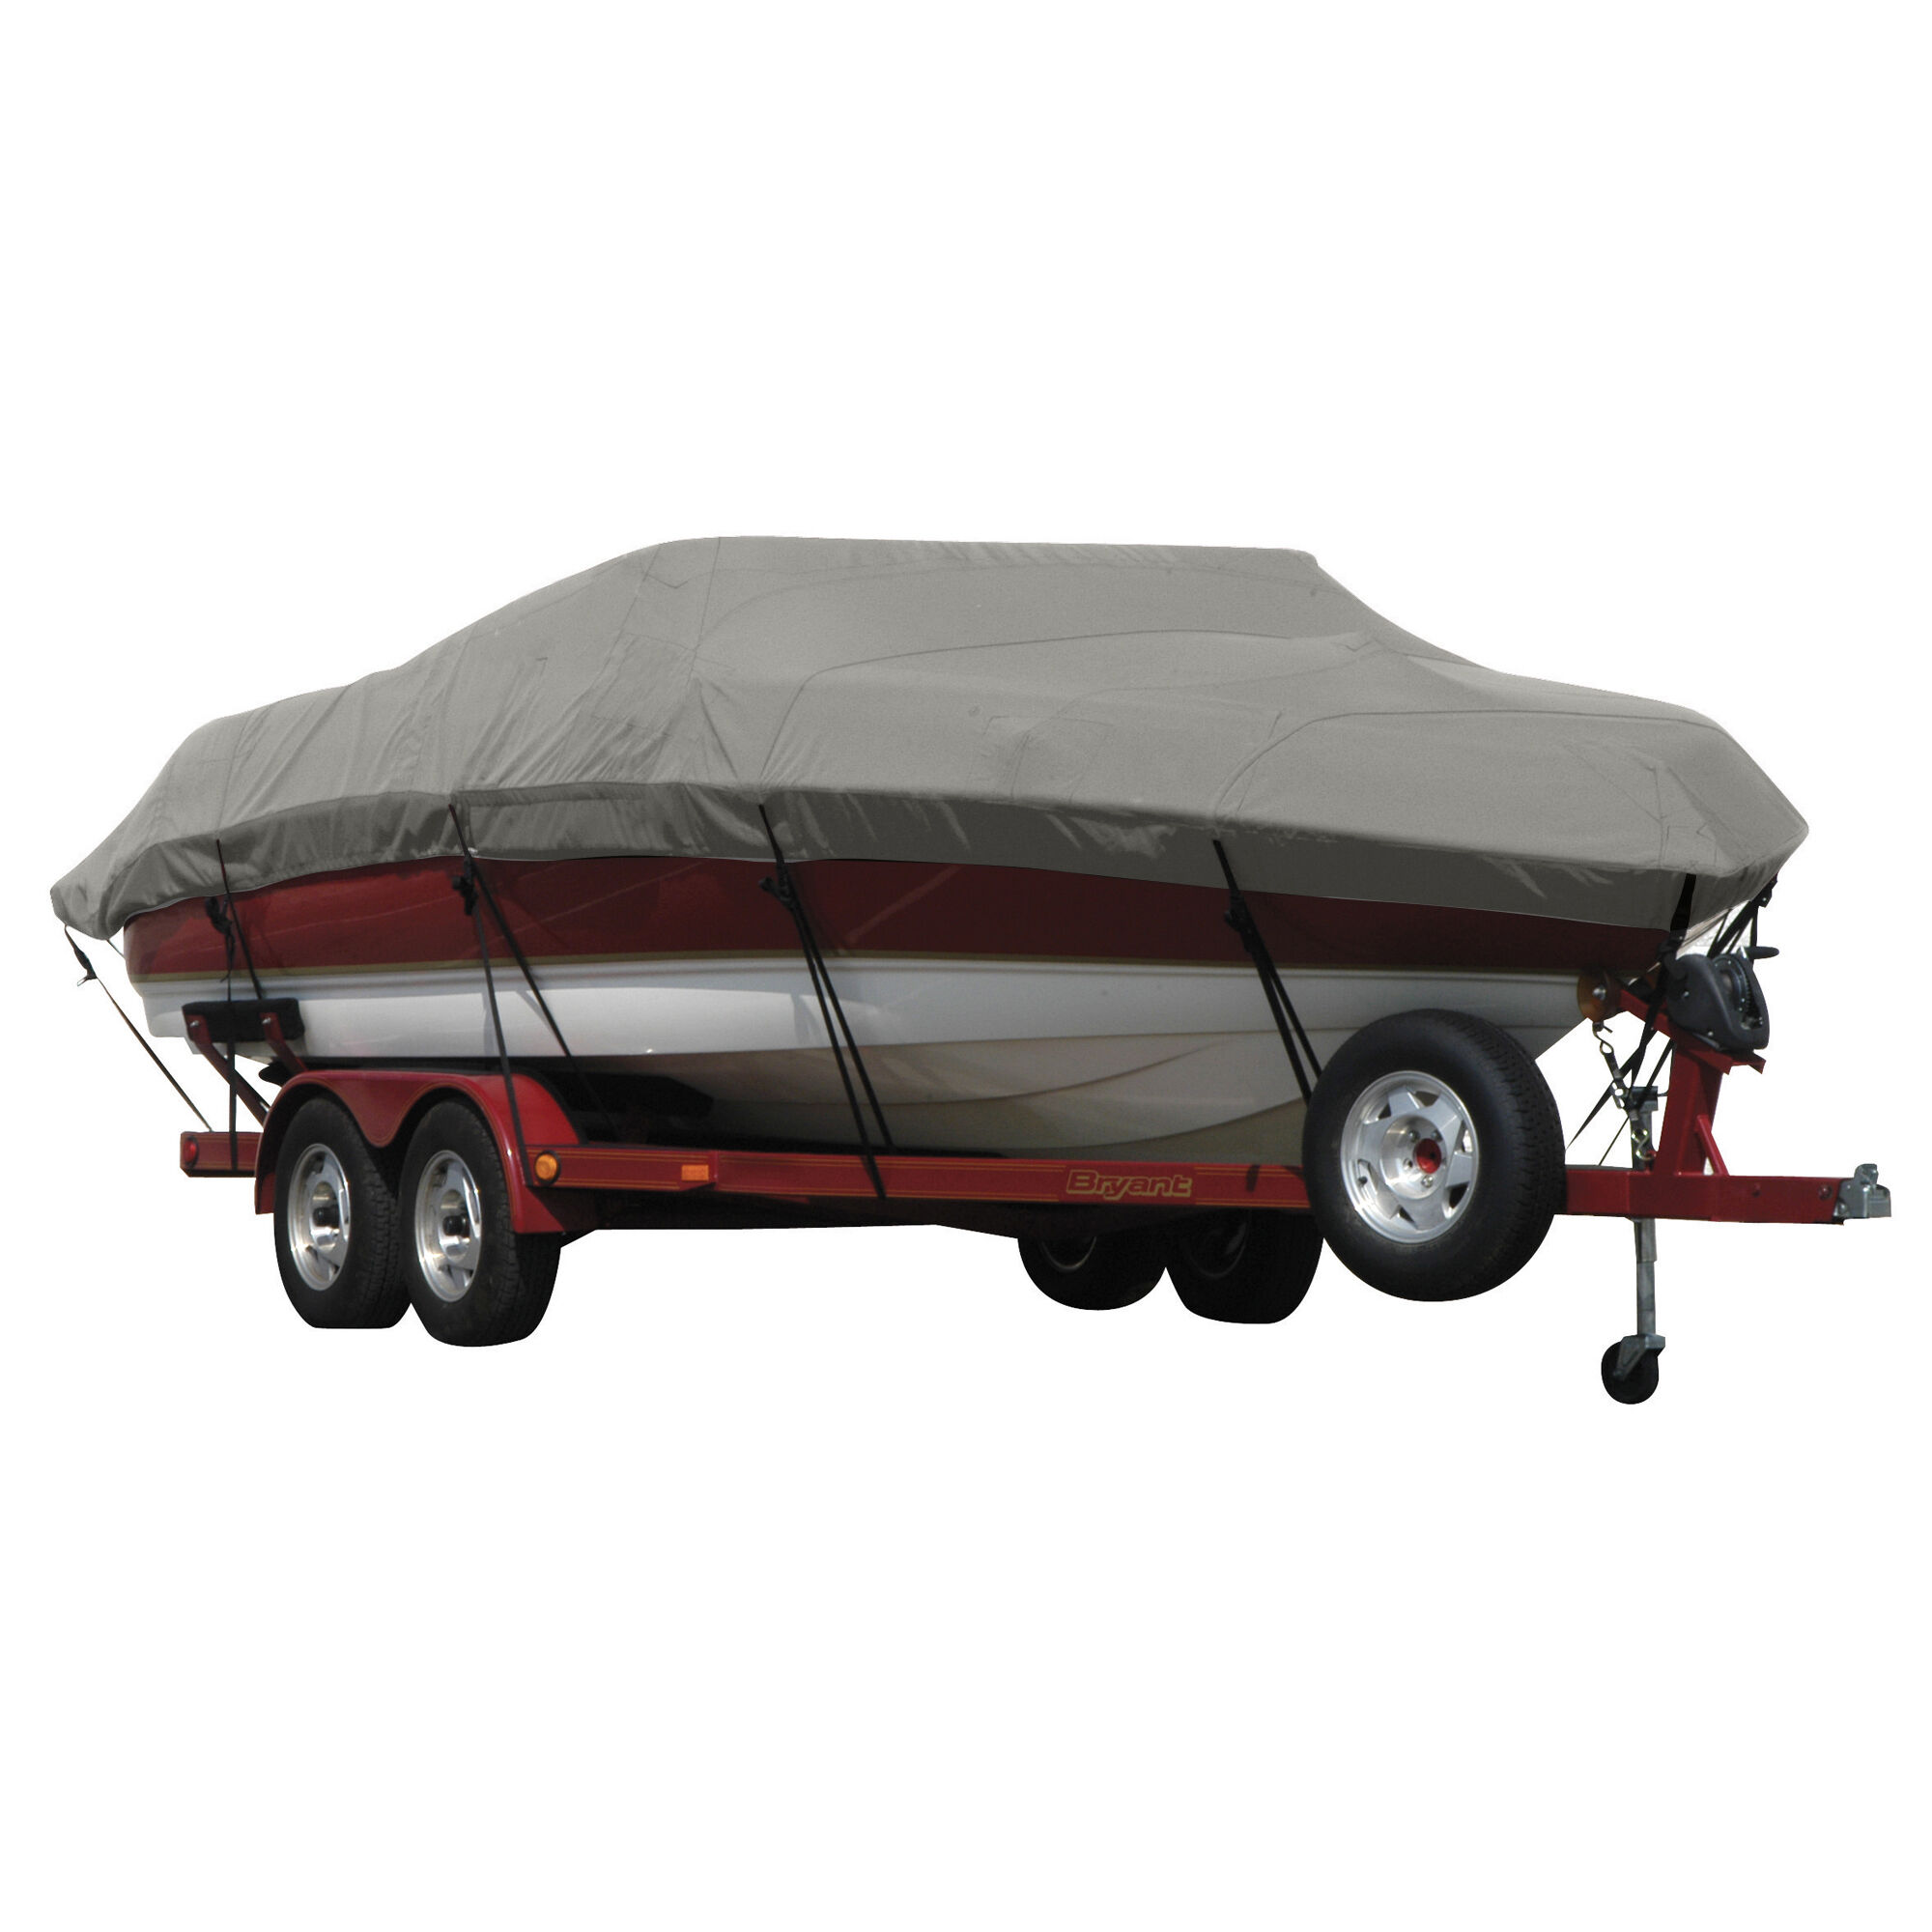 Covermate Exact Fit Sunbrella Boat Cover for Procraft Pro 205 Pro 205 Side Console w/ Shield w/ Port Trolling Motor O/B. Charcoal Grey Heather